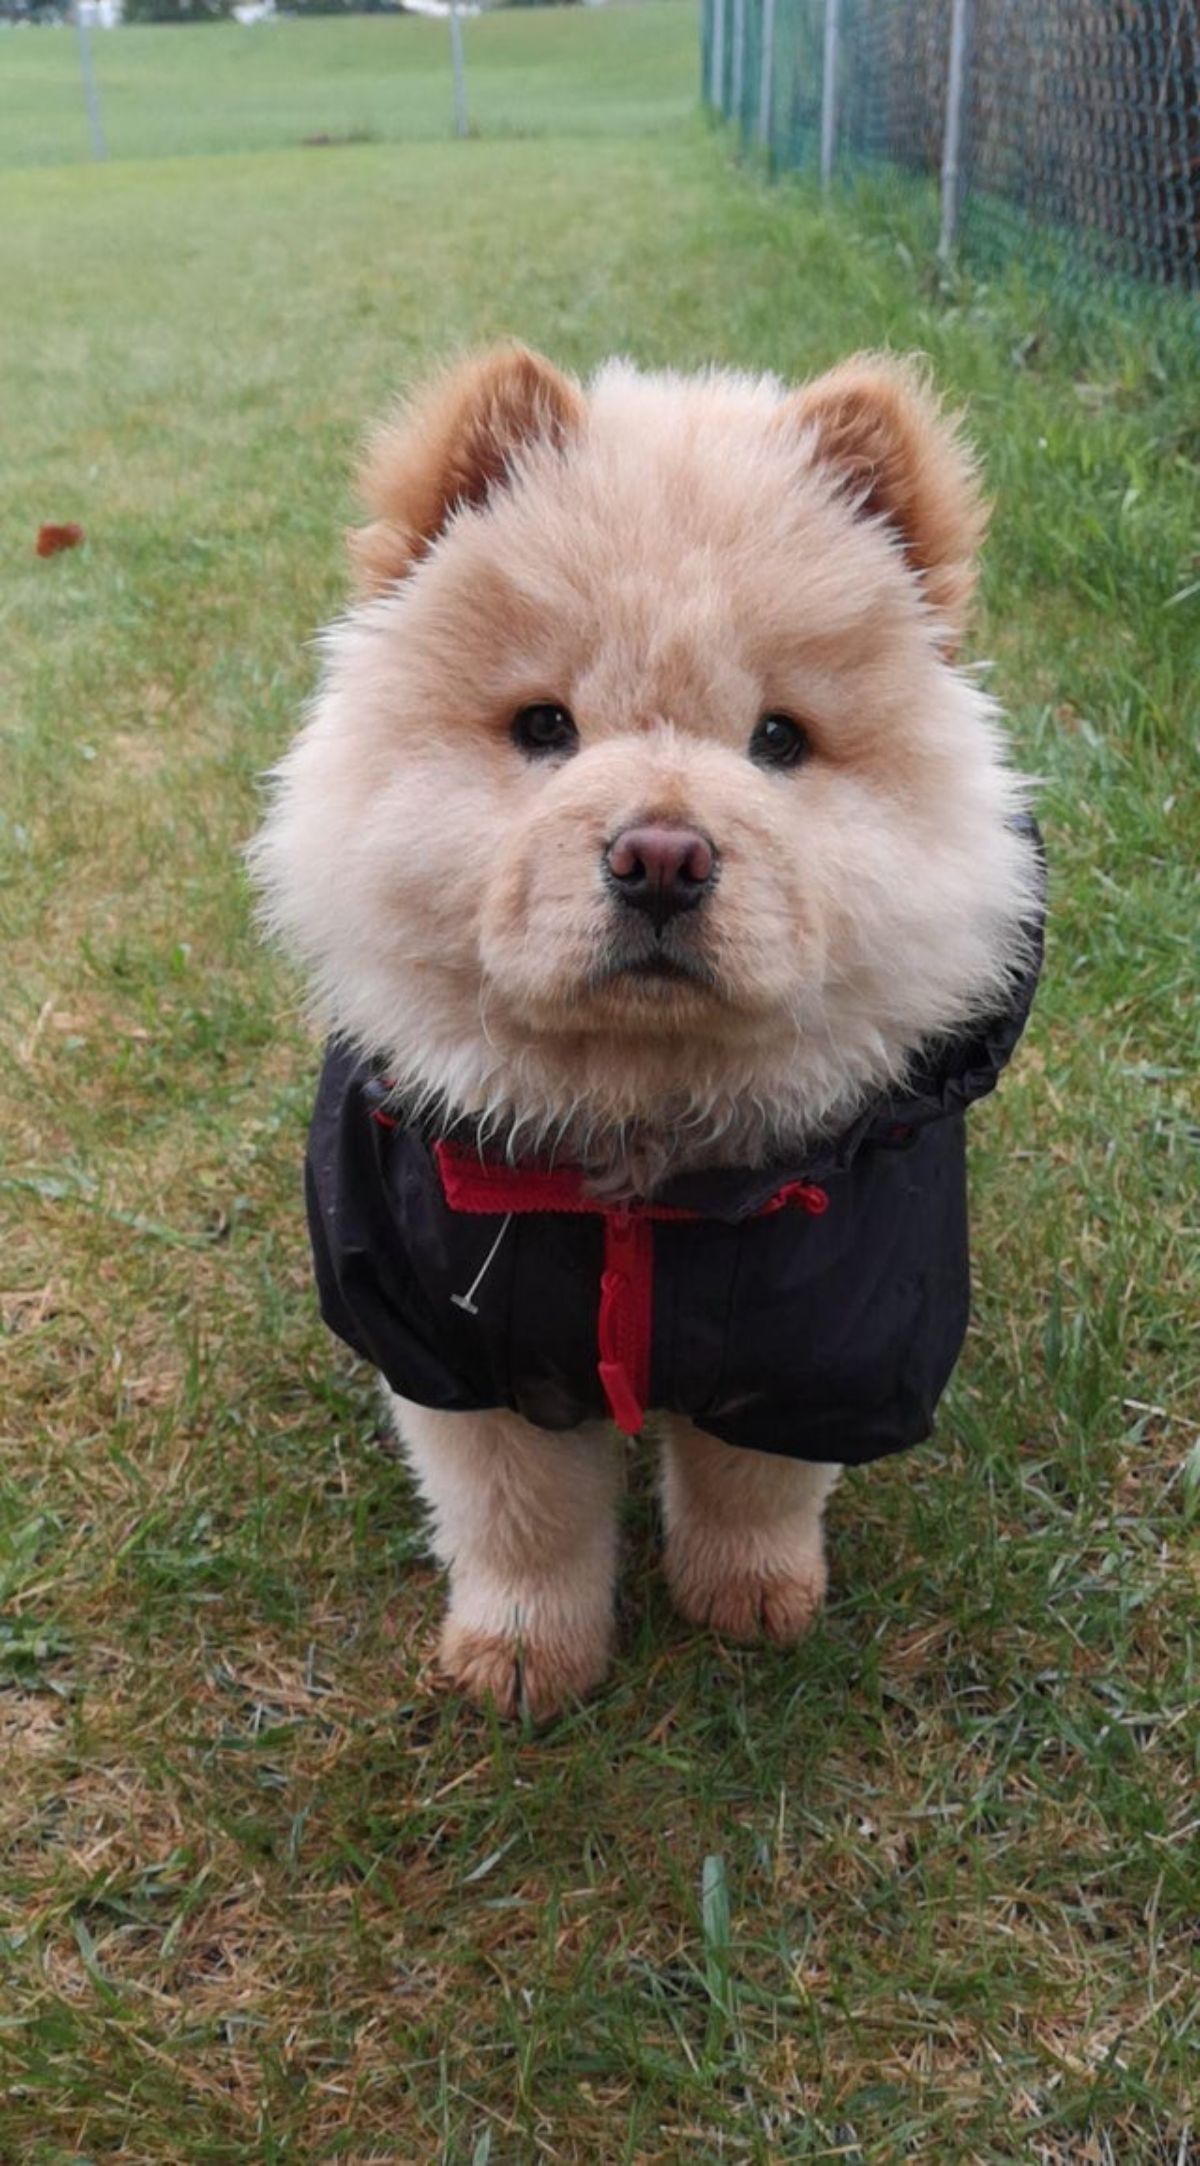 brown chow chow puppy standing on grass wearing a black and red jacket